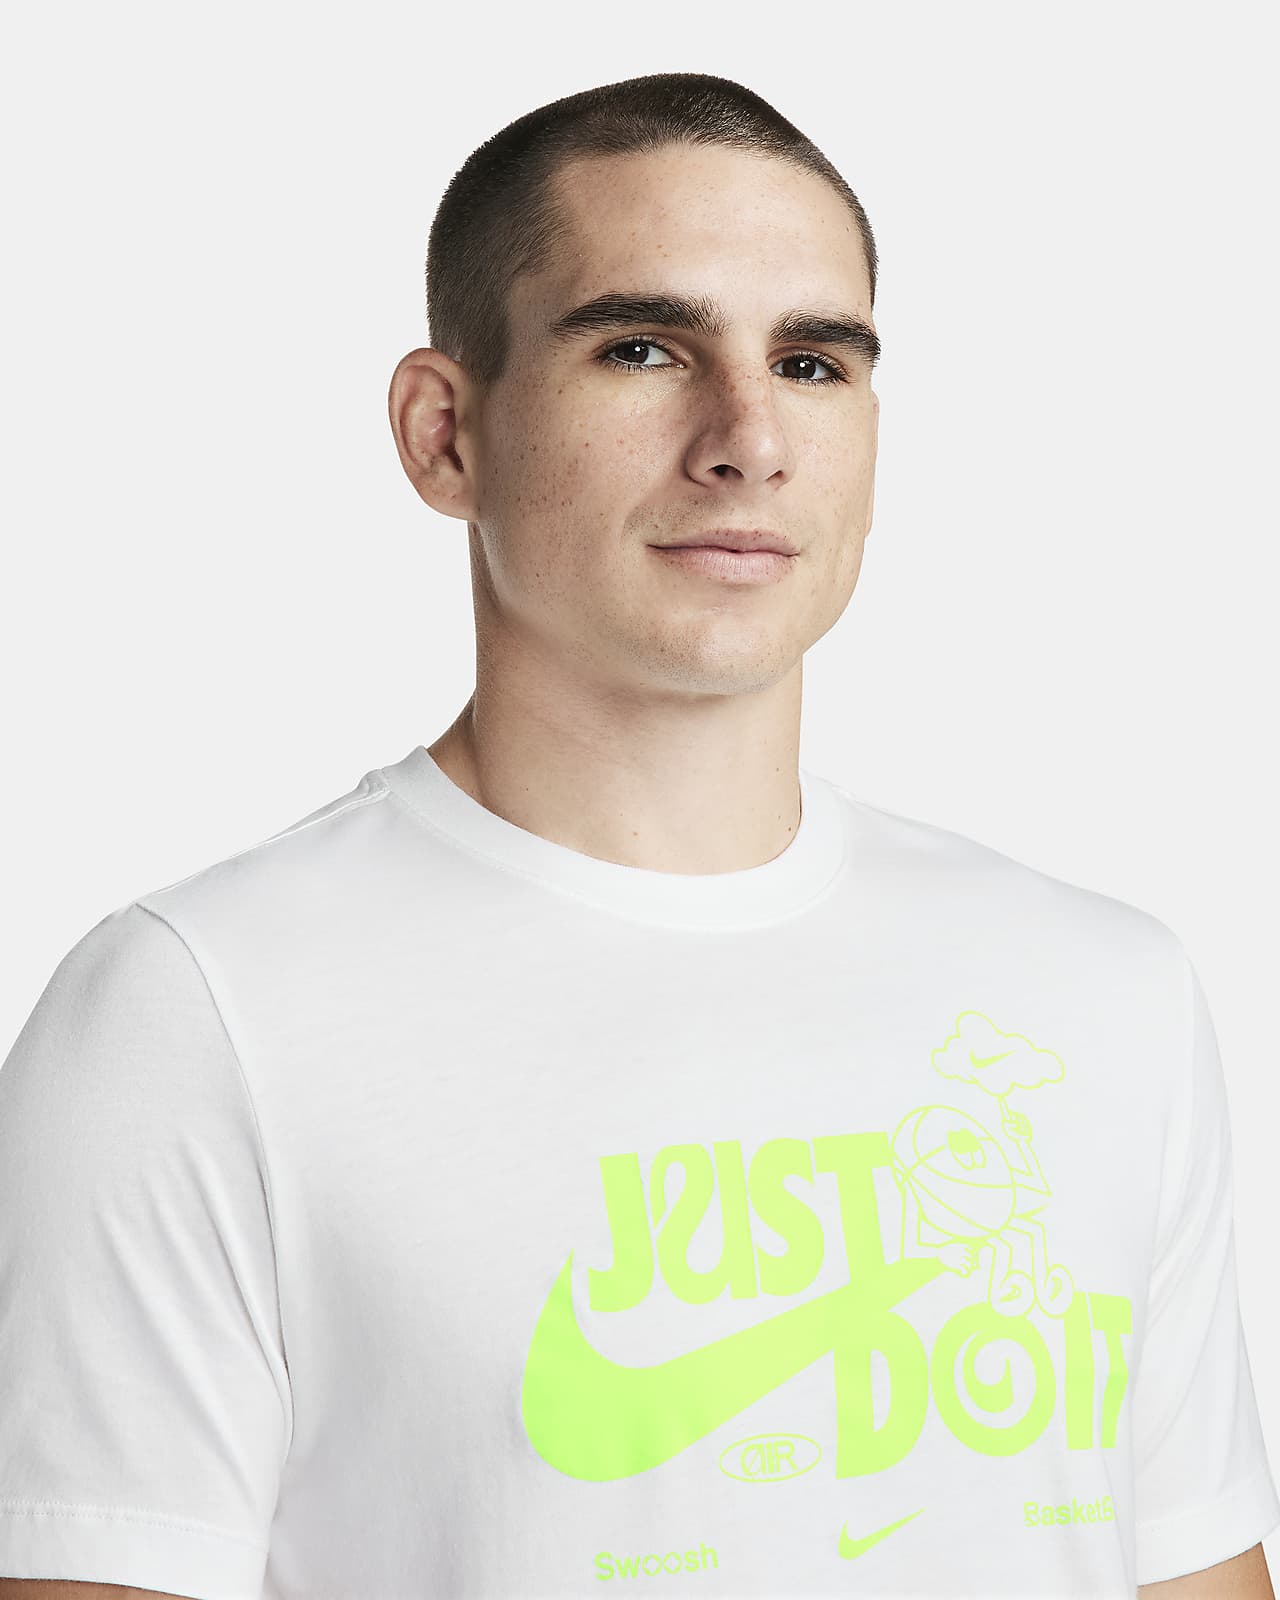 Nike Archaeo Swoosh Pack Graphic All Over Print T-shirt in White